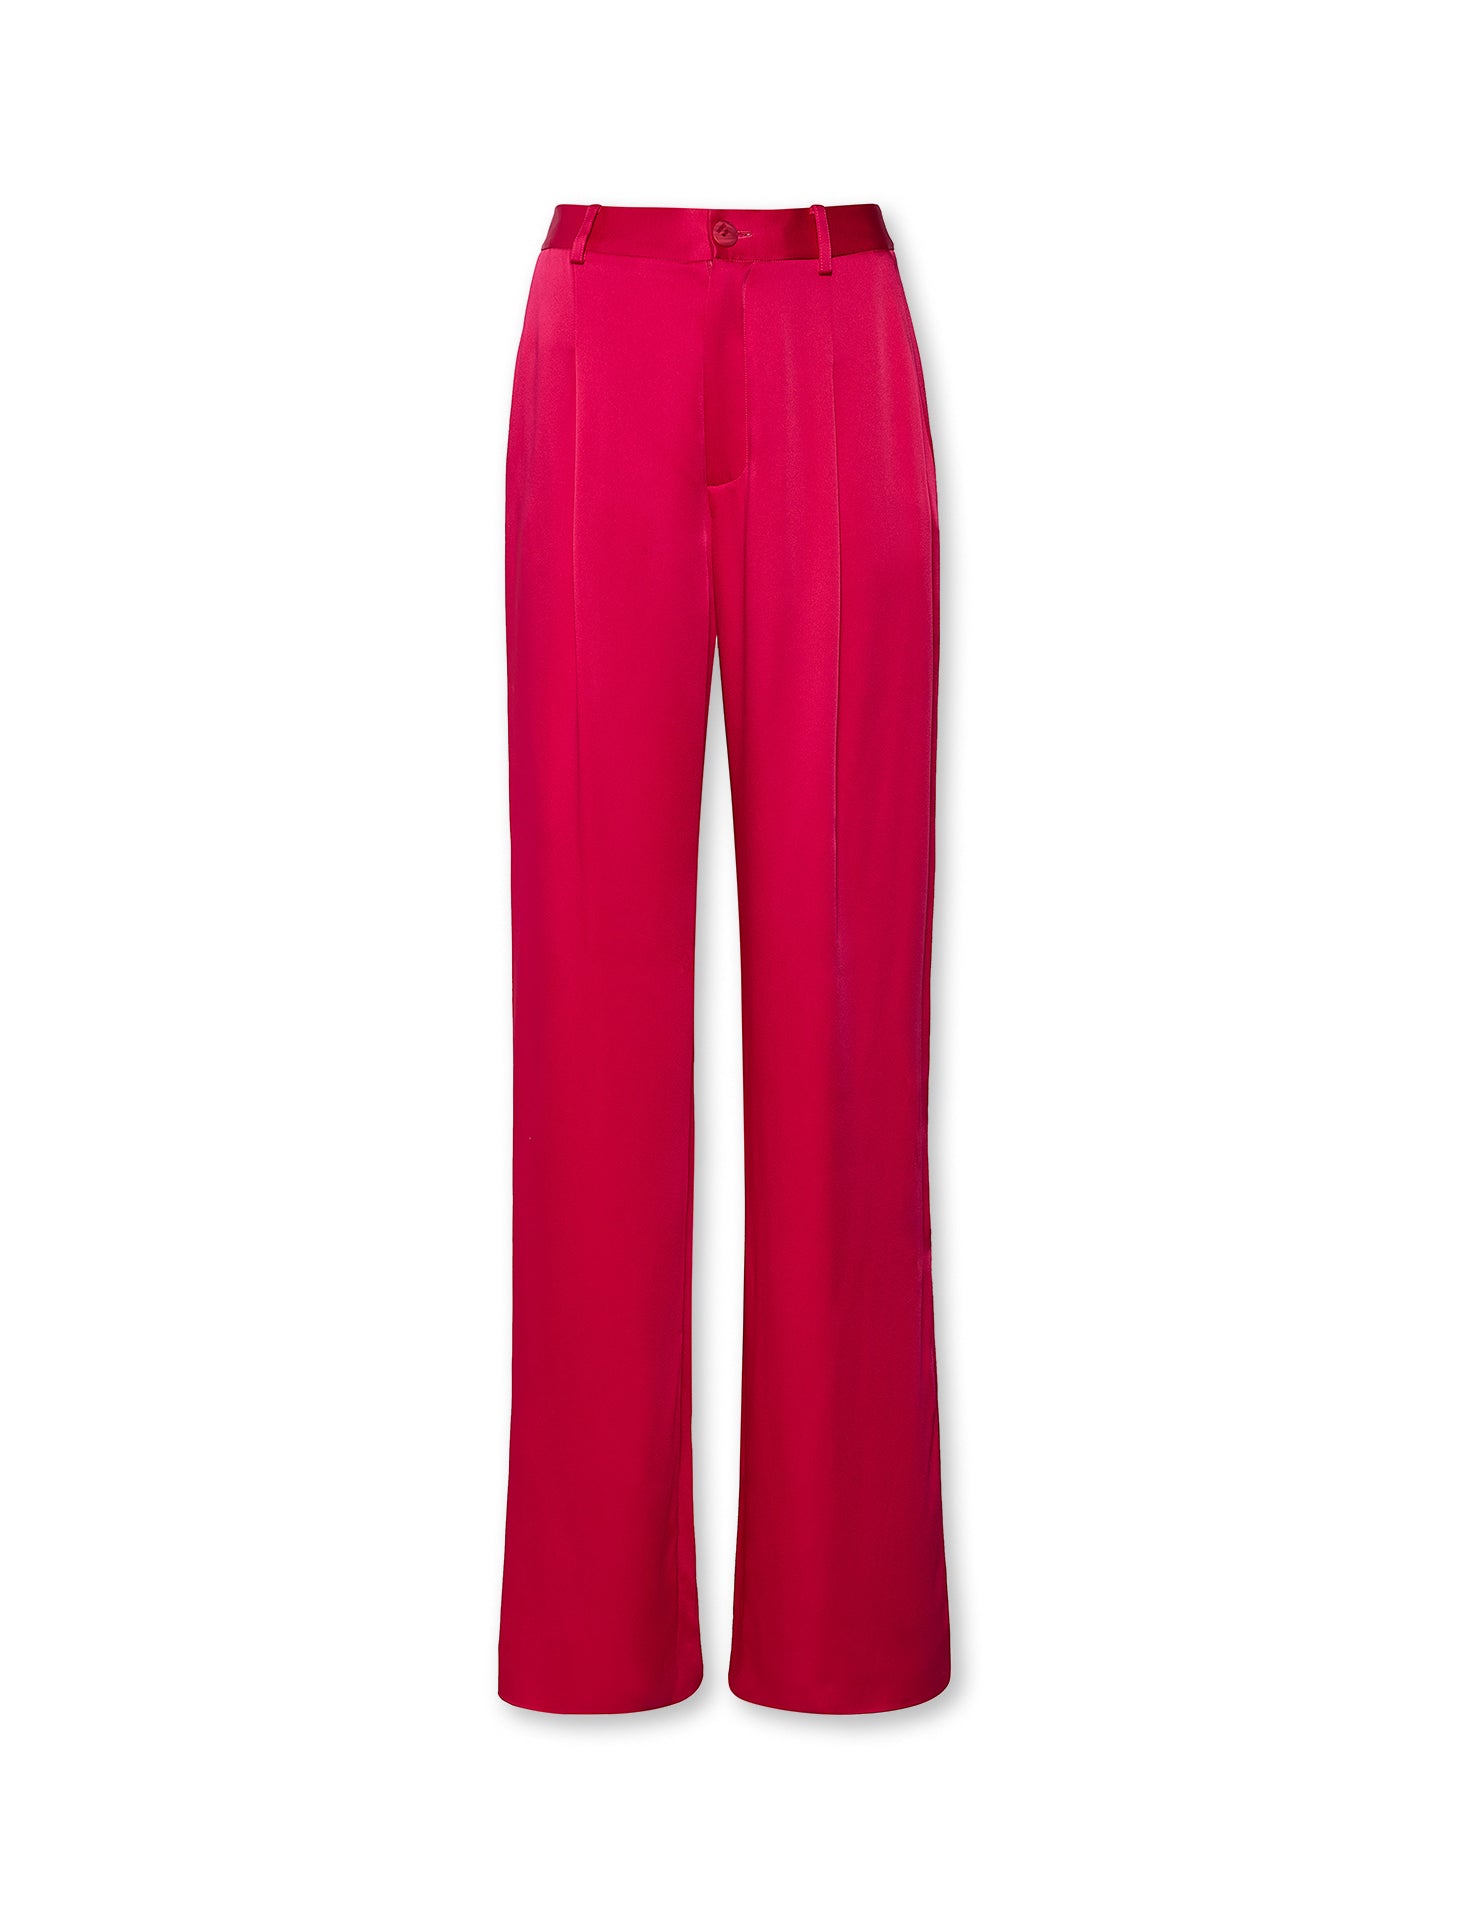 Doubleface Satin Relaxed Pleated Pant